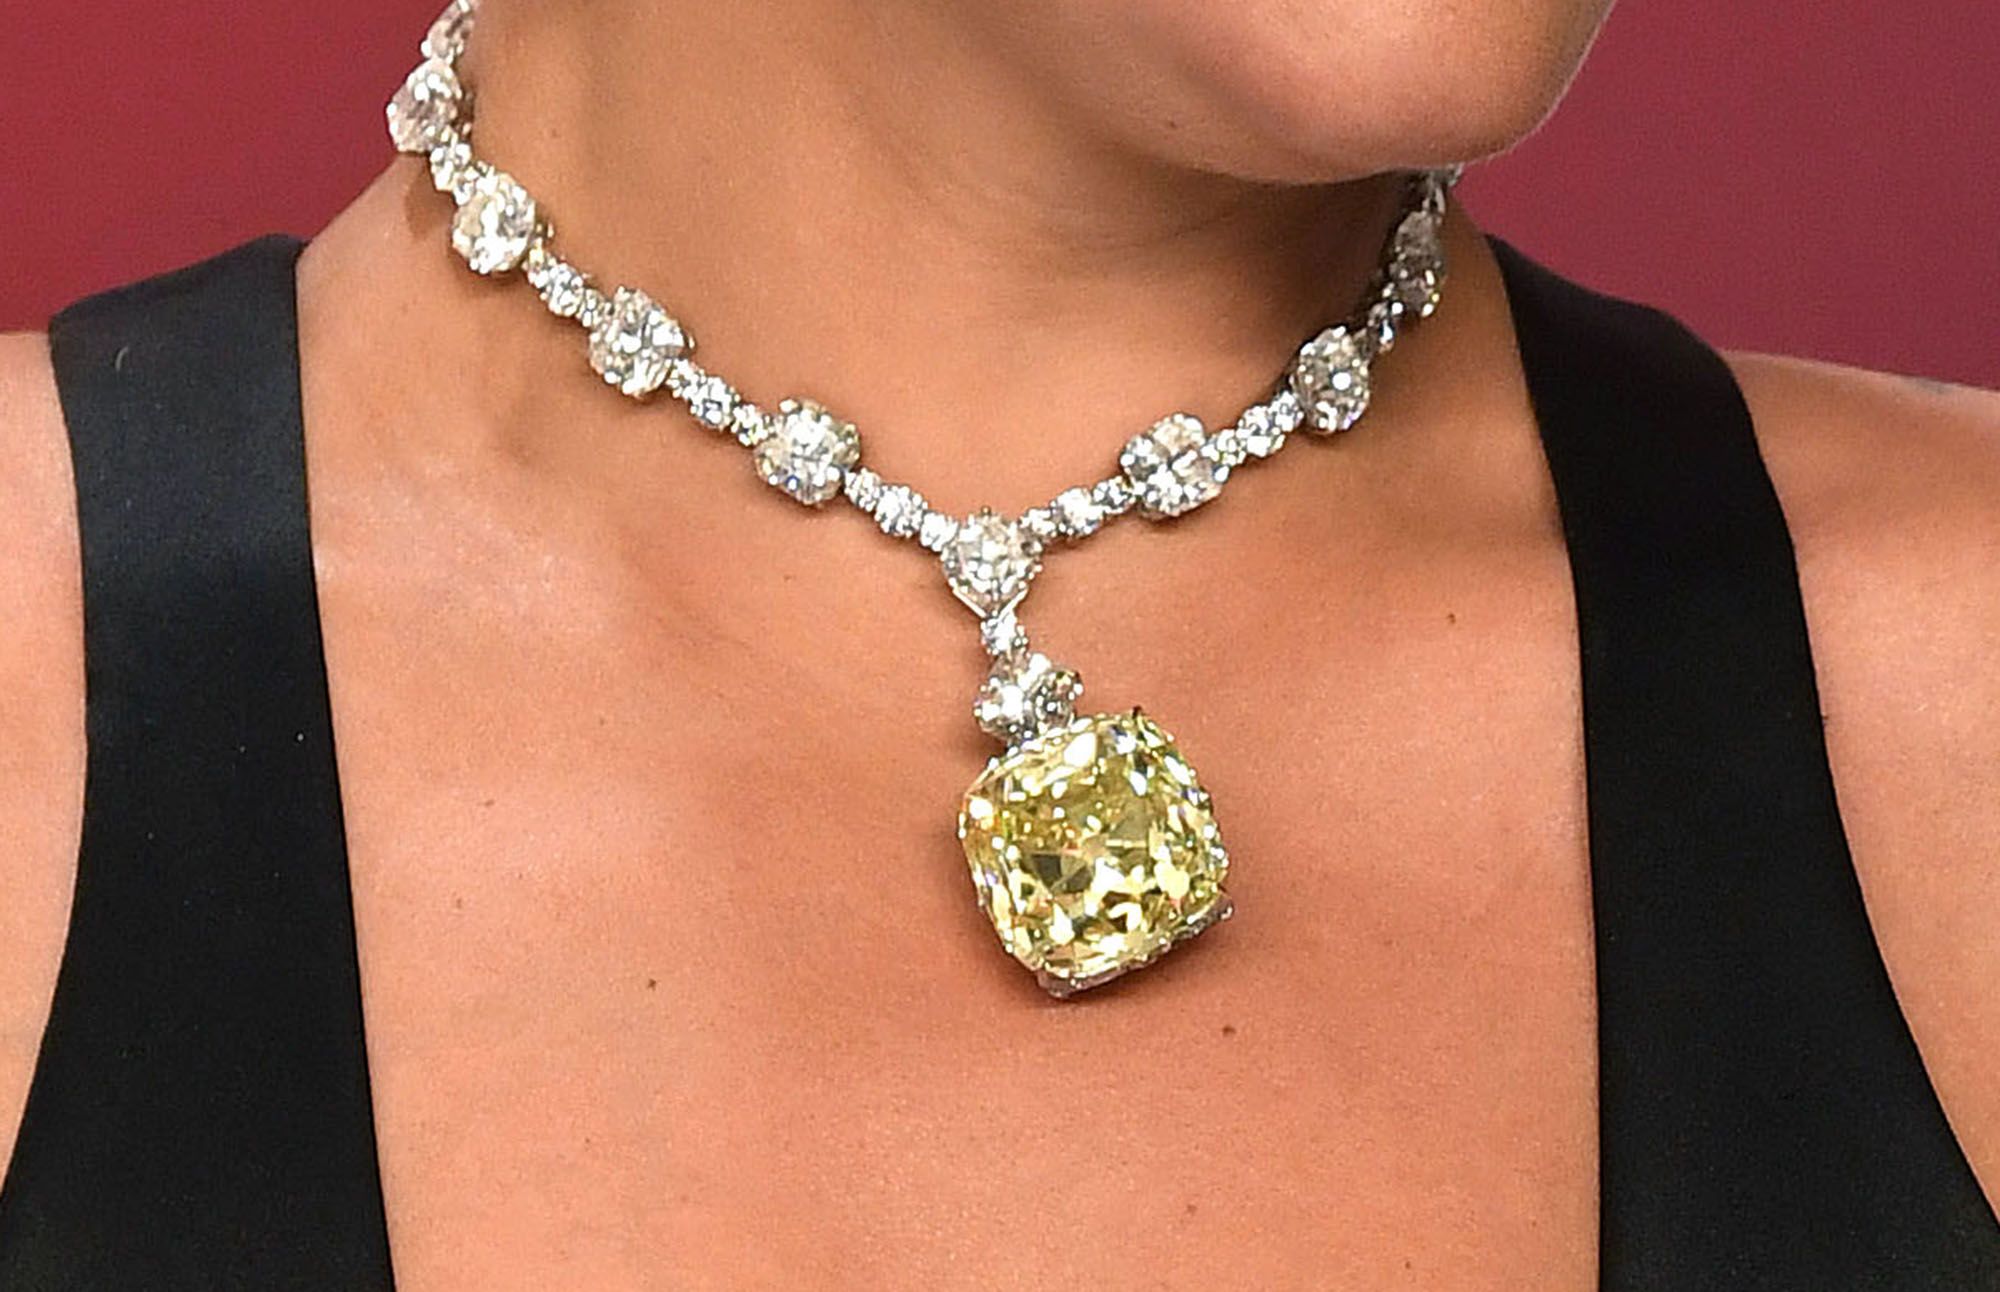 10 of the most expensive celebrity red carpet jewels ever, ranked